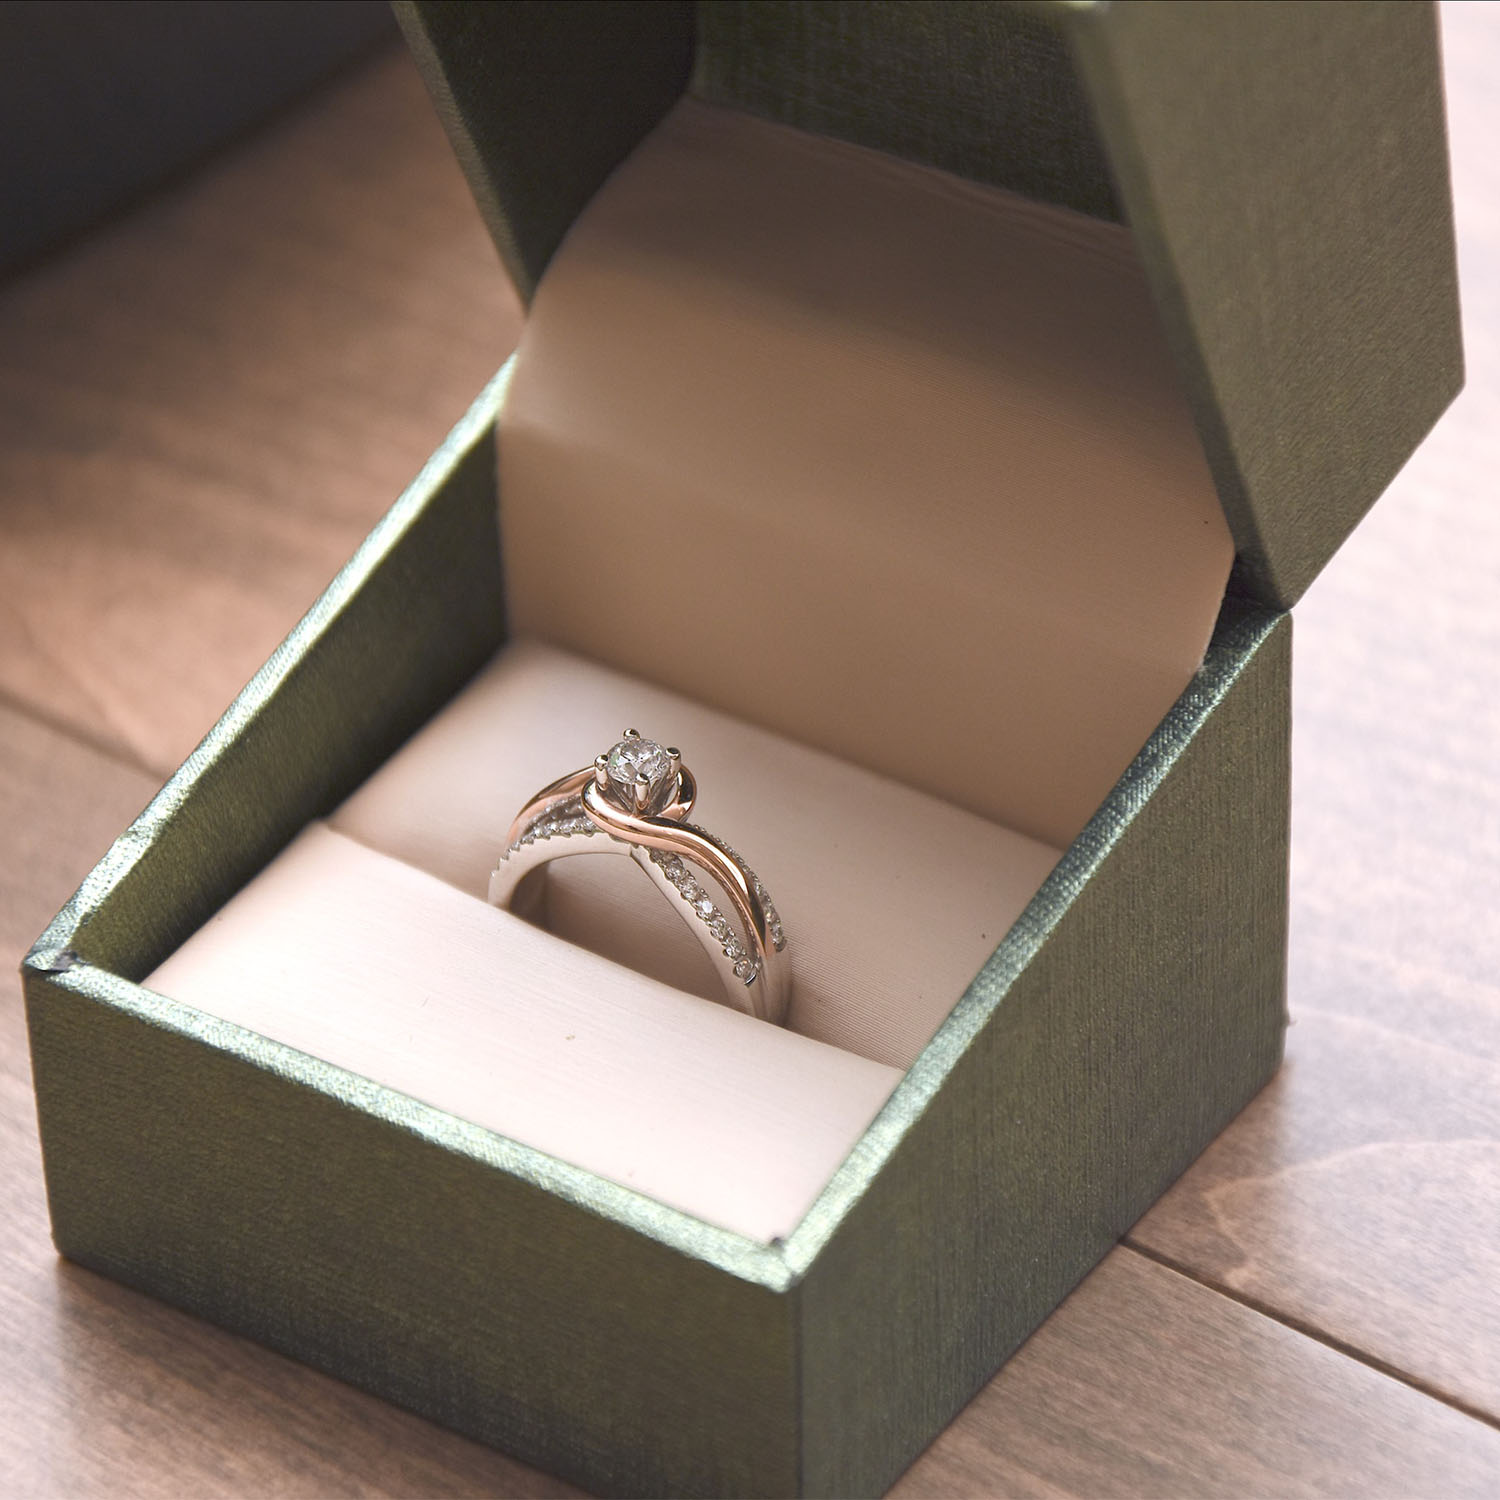 Personalided Engagement Ring Box made from Rare Wood